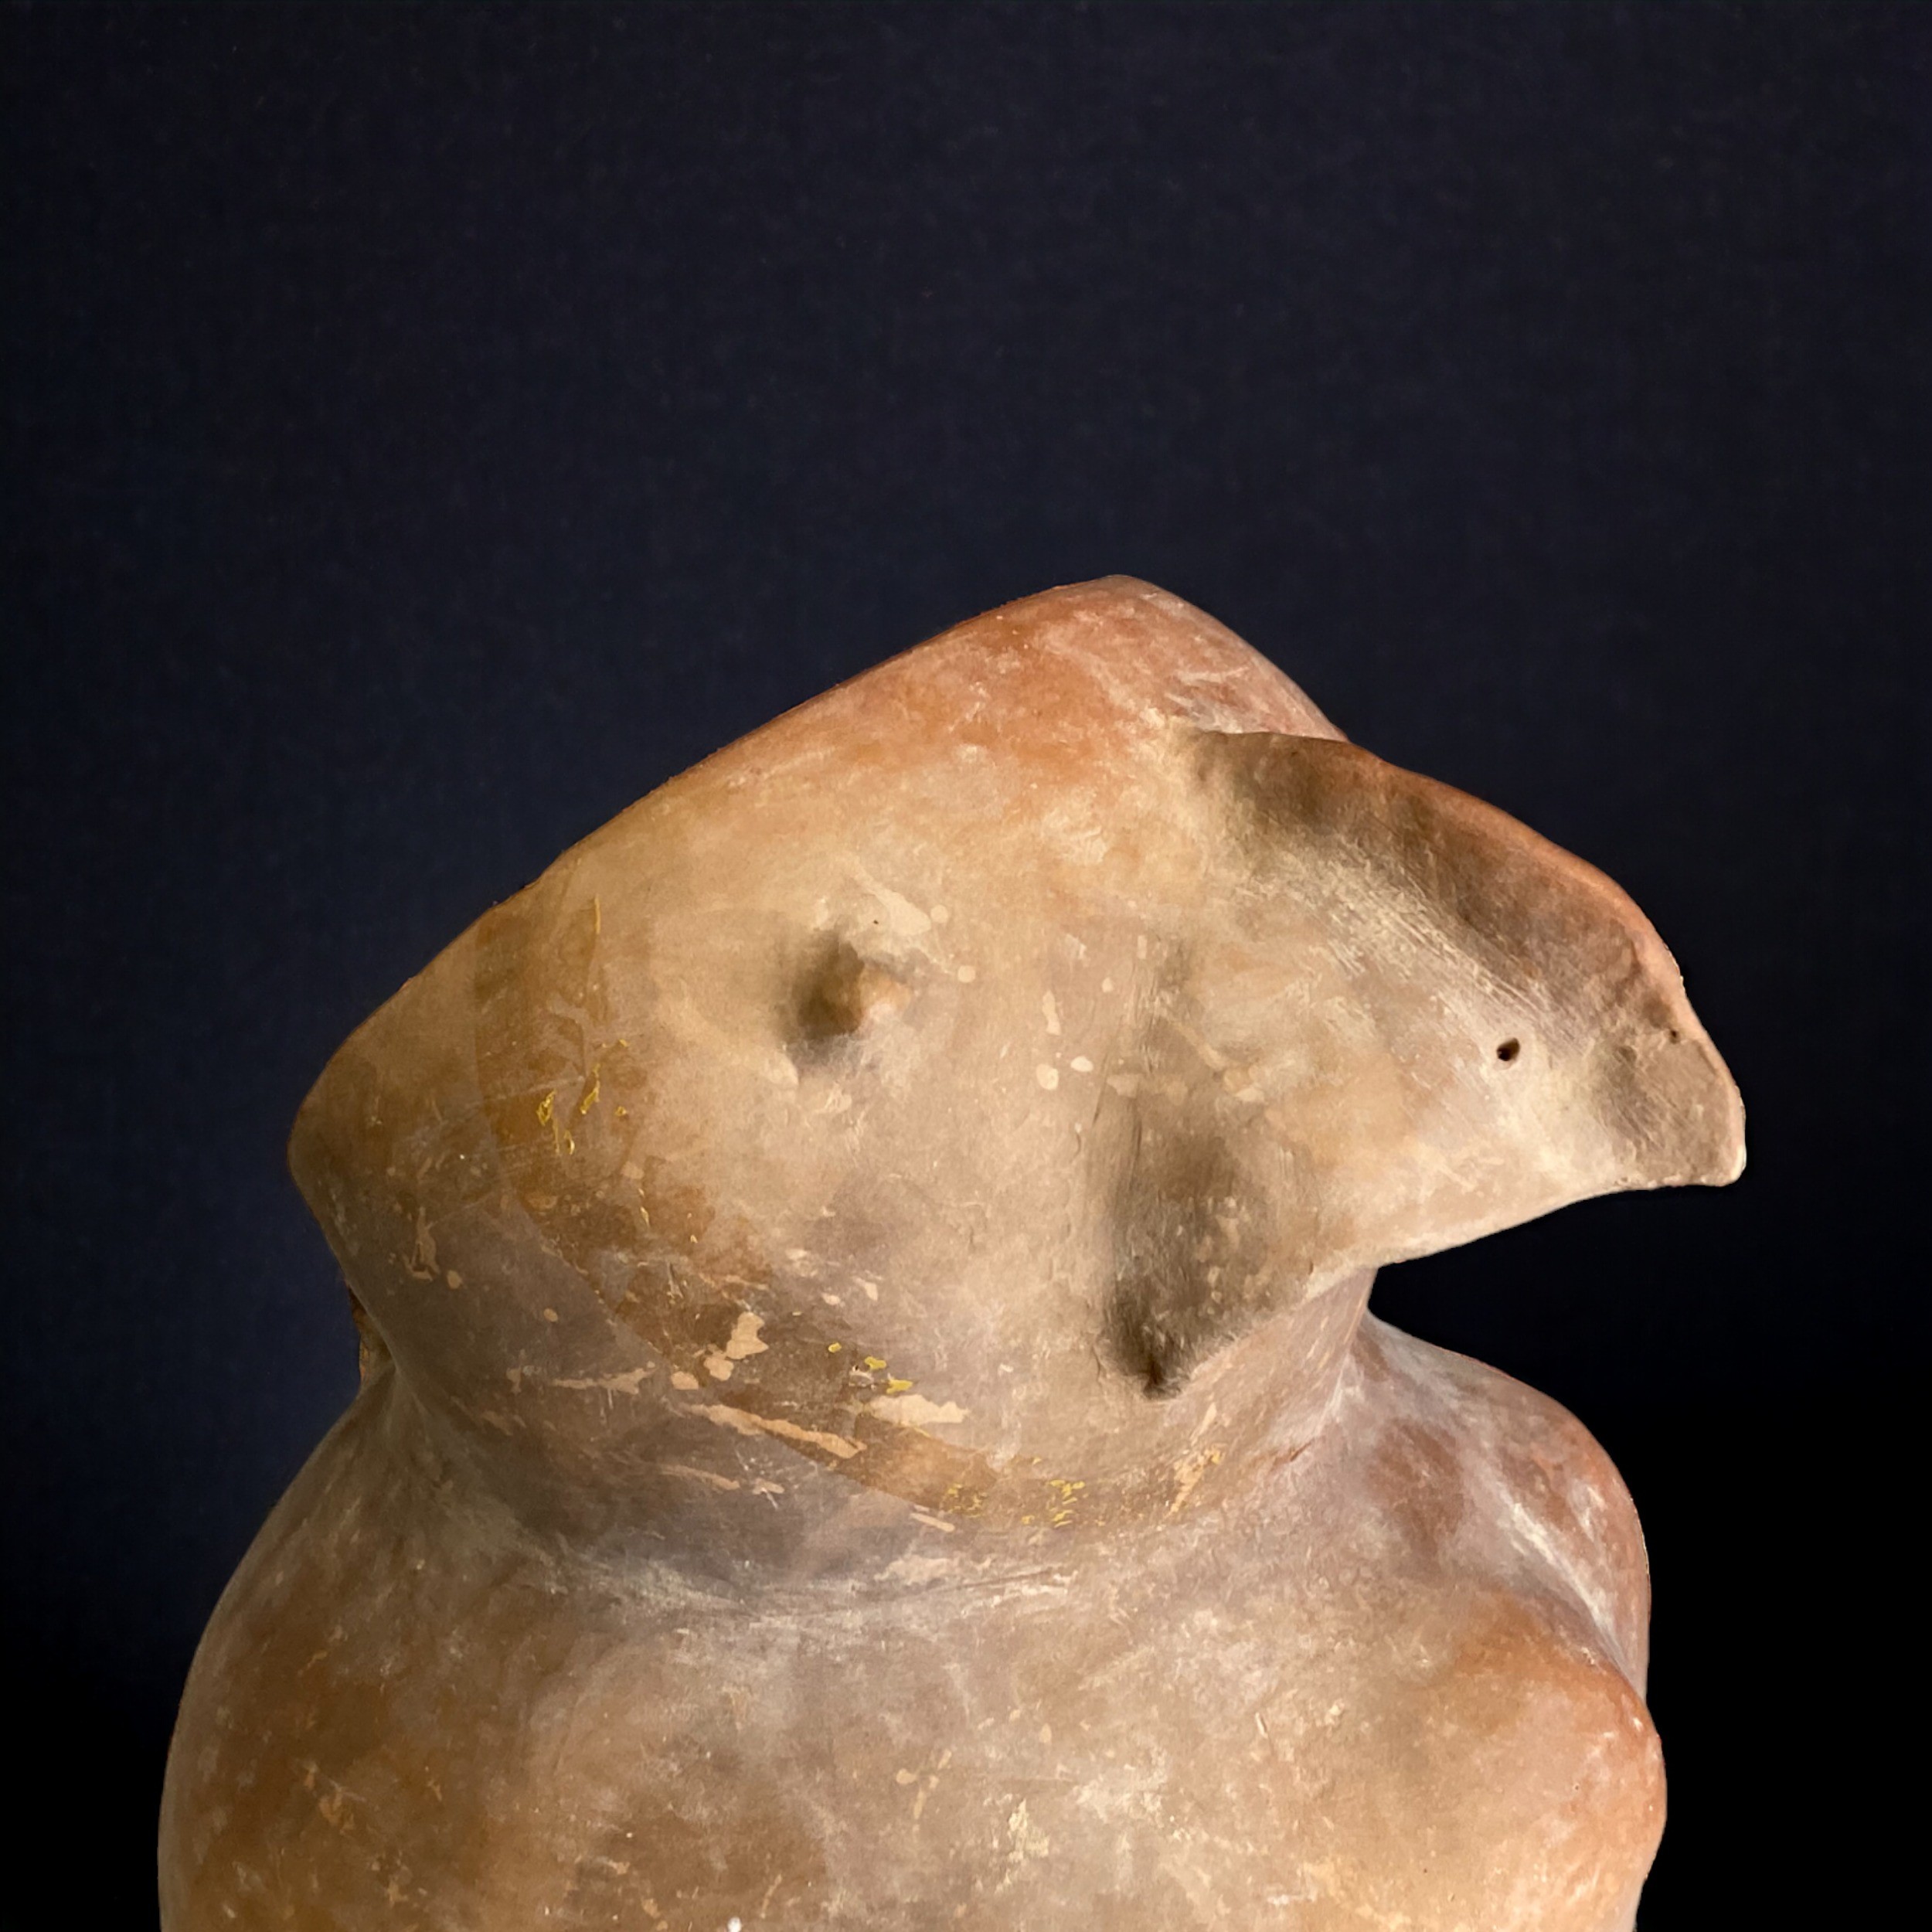 A red Neolithic pottery eagle vessel, Yangshao culture c 4800-4300 BC 仰韶文化 鹰壶 紅陶 - Image 3 of 5